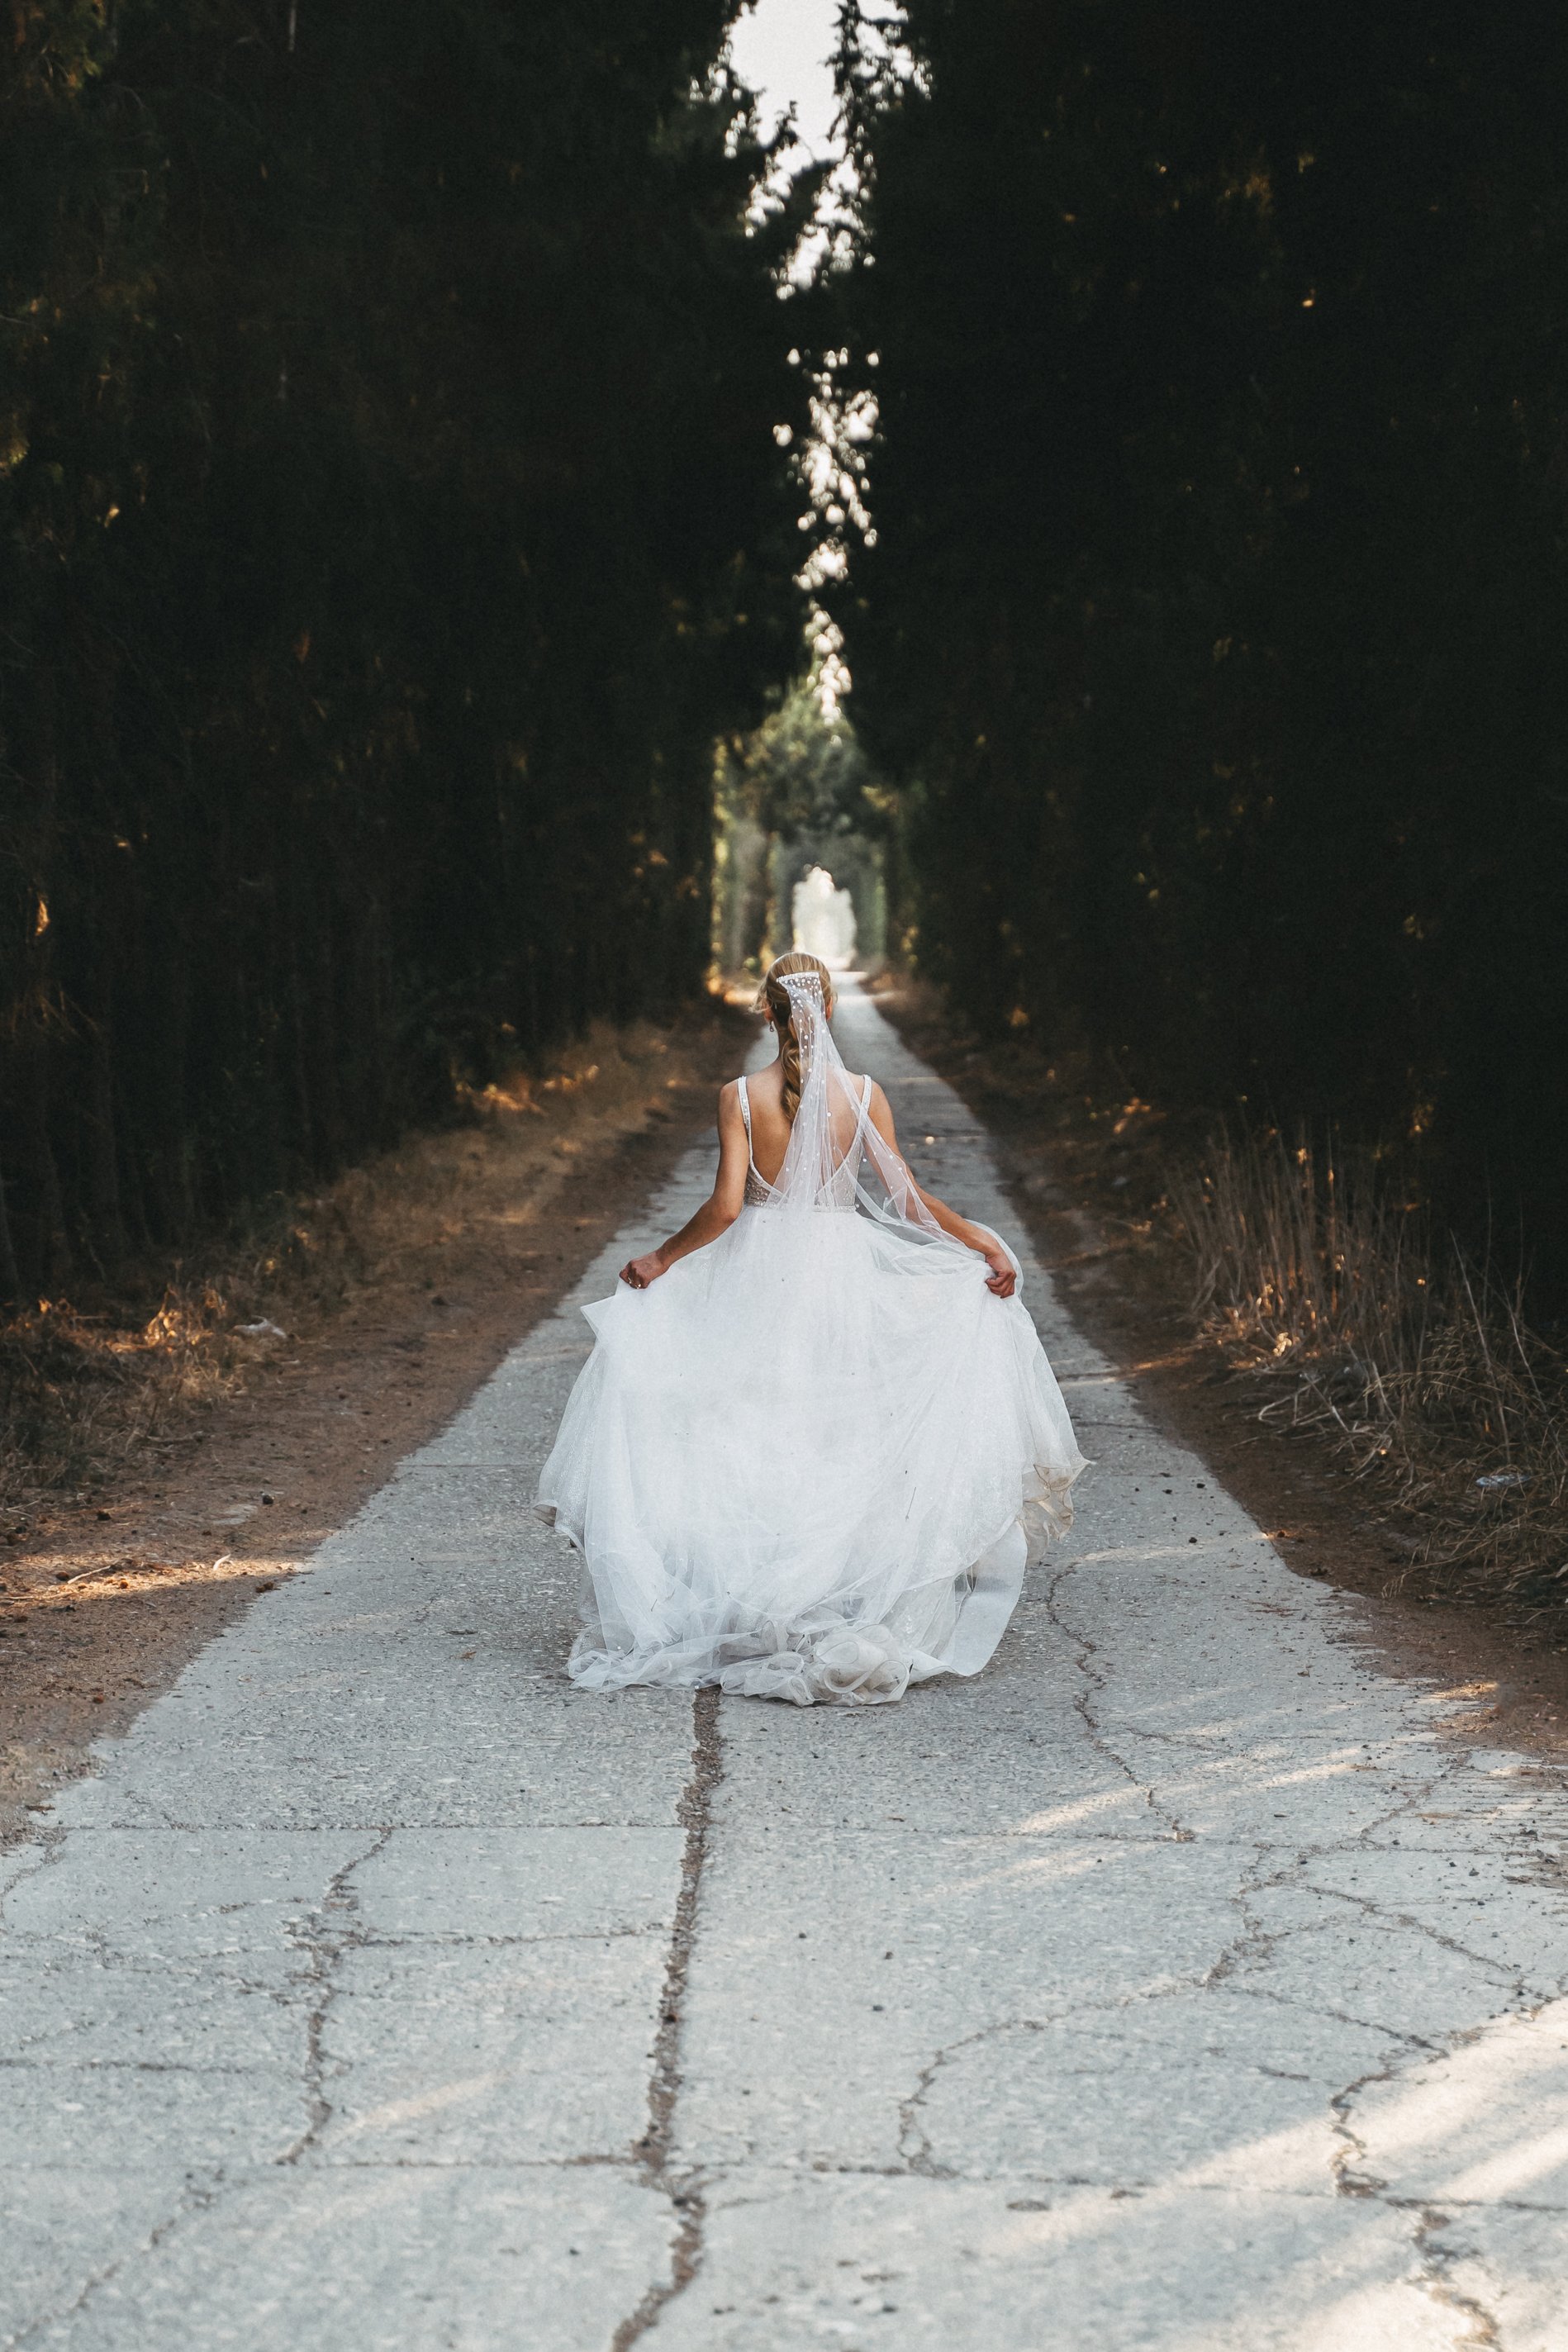 Get beautiful and unique wedding photos with our location shoot services.